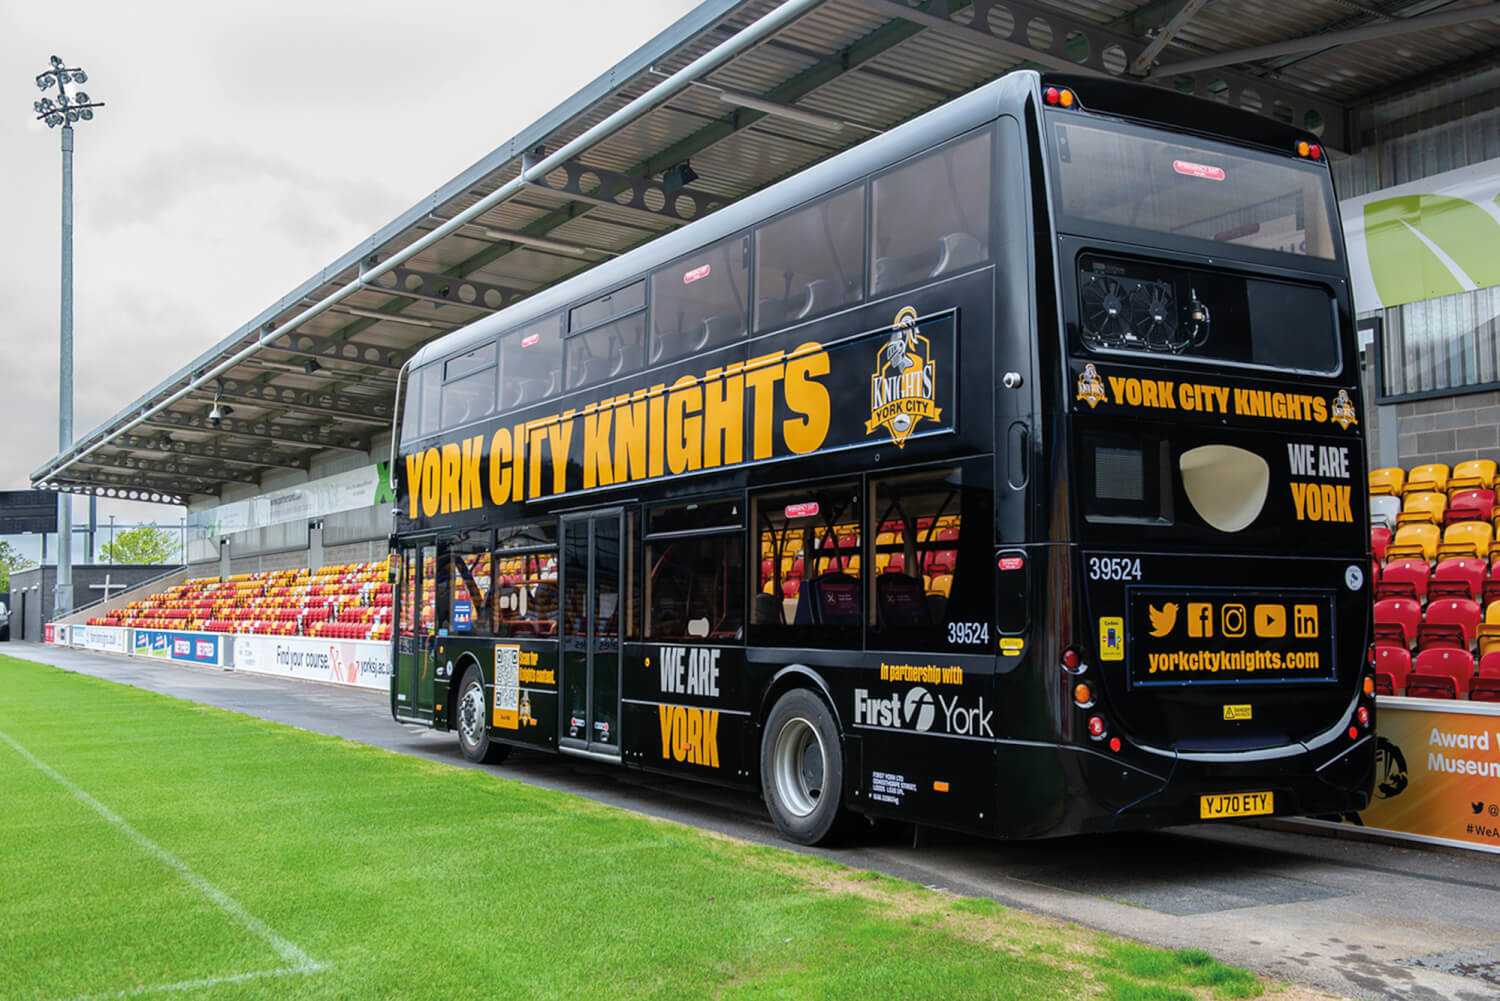 First York Buses, York City Knights